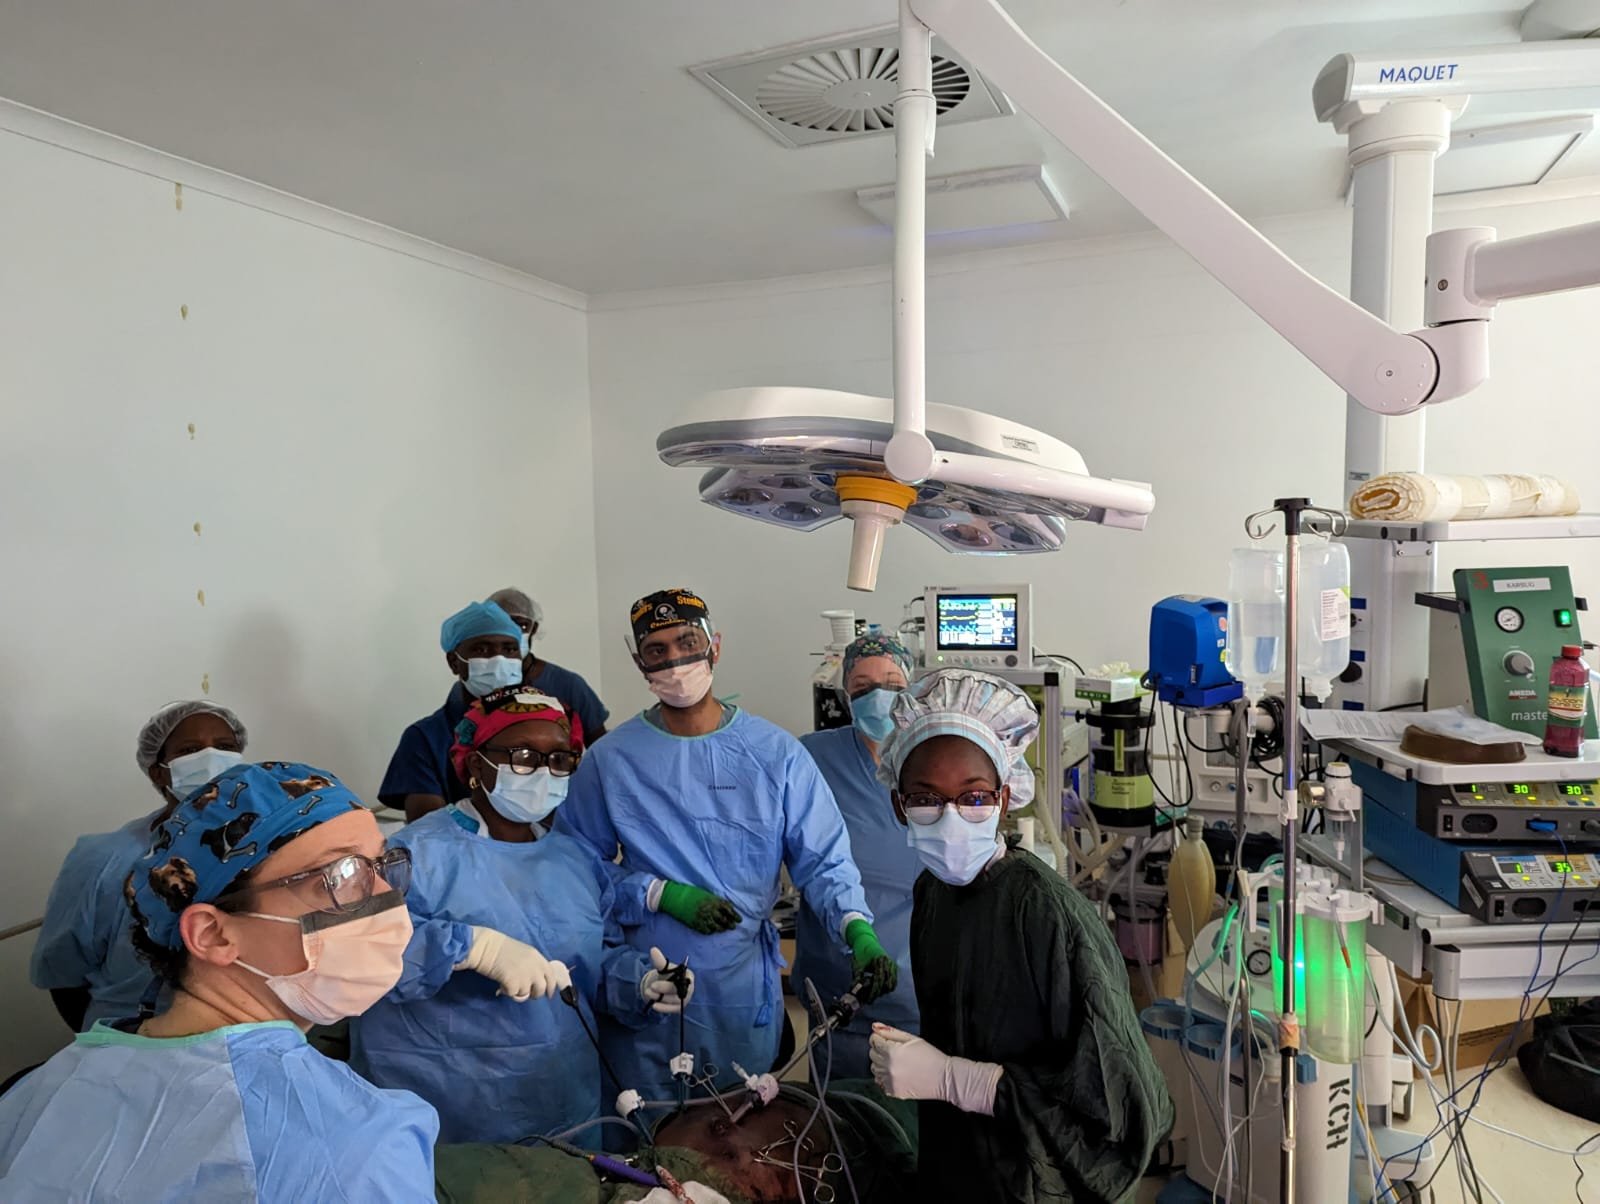 The team uses laparoscopic technology to perform a colostomy reversal surgery.